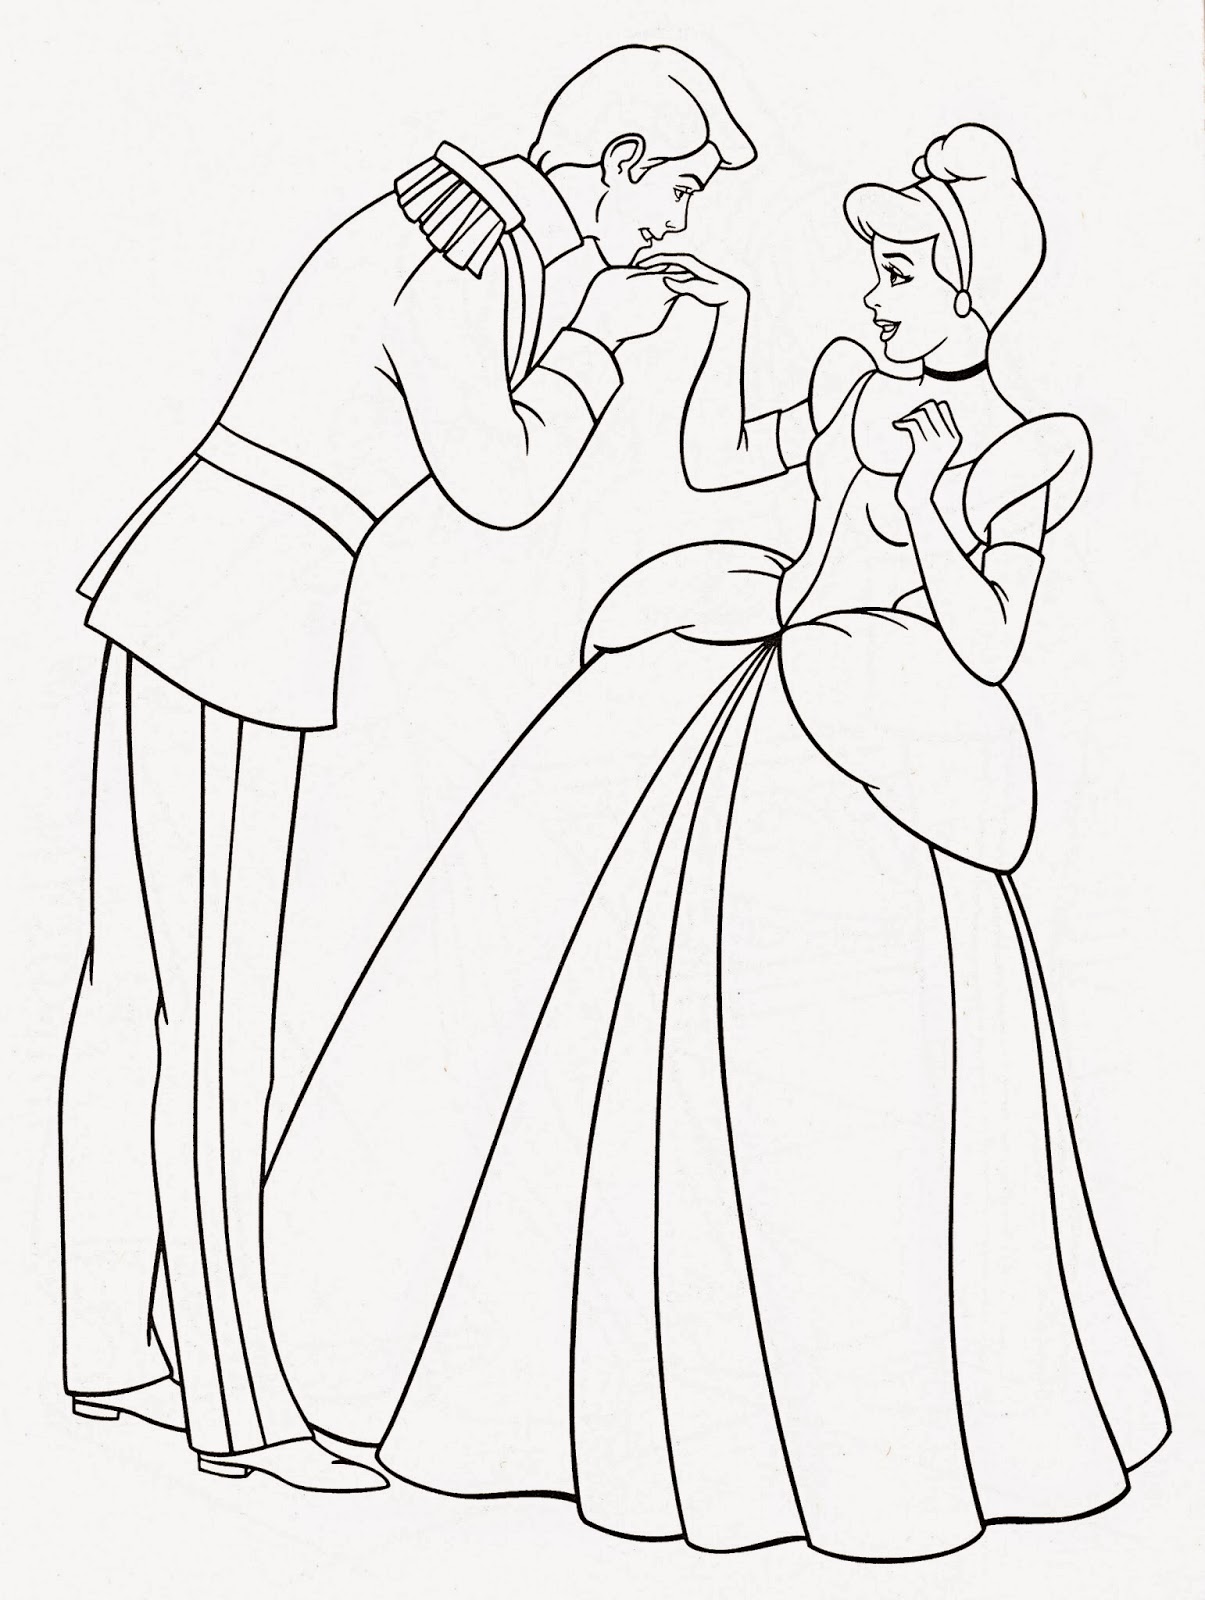 Download Coloring Pages: Cinderella Free Printable Coloring Pages